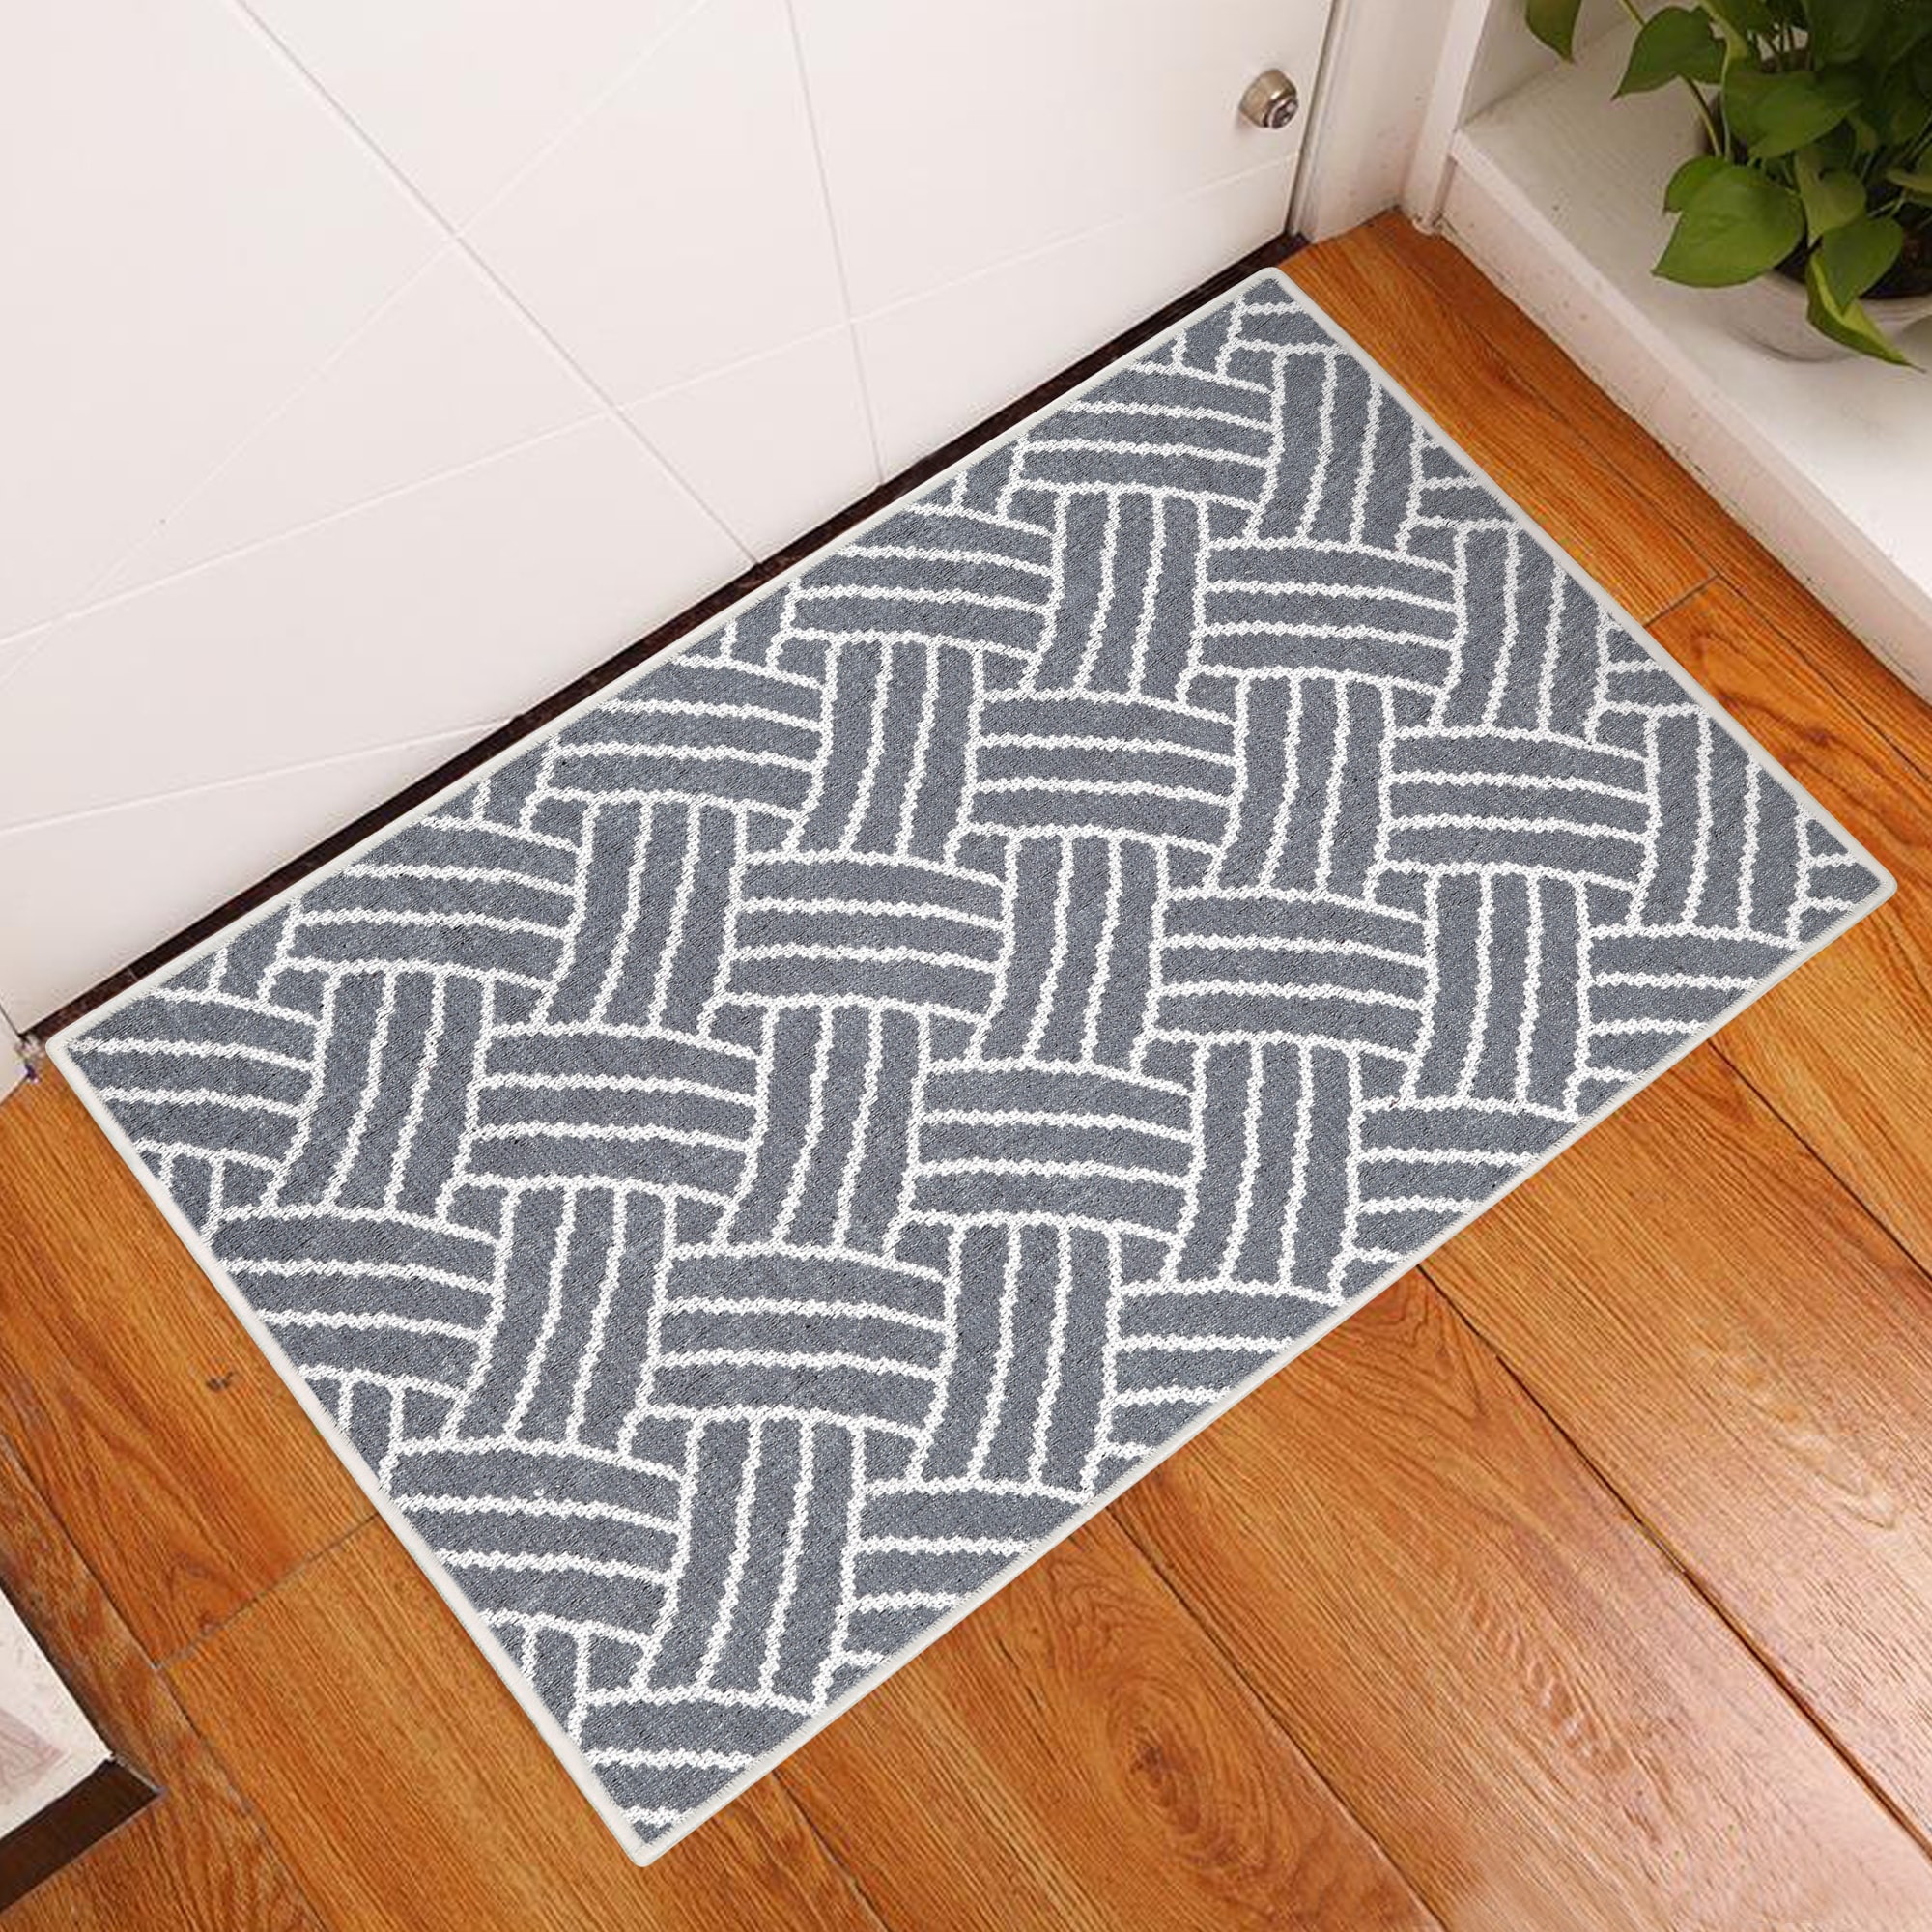 https://ak1.ostkcdn.com/images/products/is/images/direct/9b470bc6b052b1be91298fb249432203a4b90c50/Sisal-Collection-2-x-3-Foot-Rug-Runner-Thin-Non-Slip-Area-Rug---Cotton-Indoor-Rug-for-Front-Door-Foyer-Rug-for-Entryway.jpg